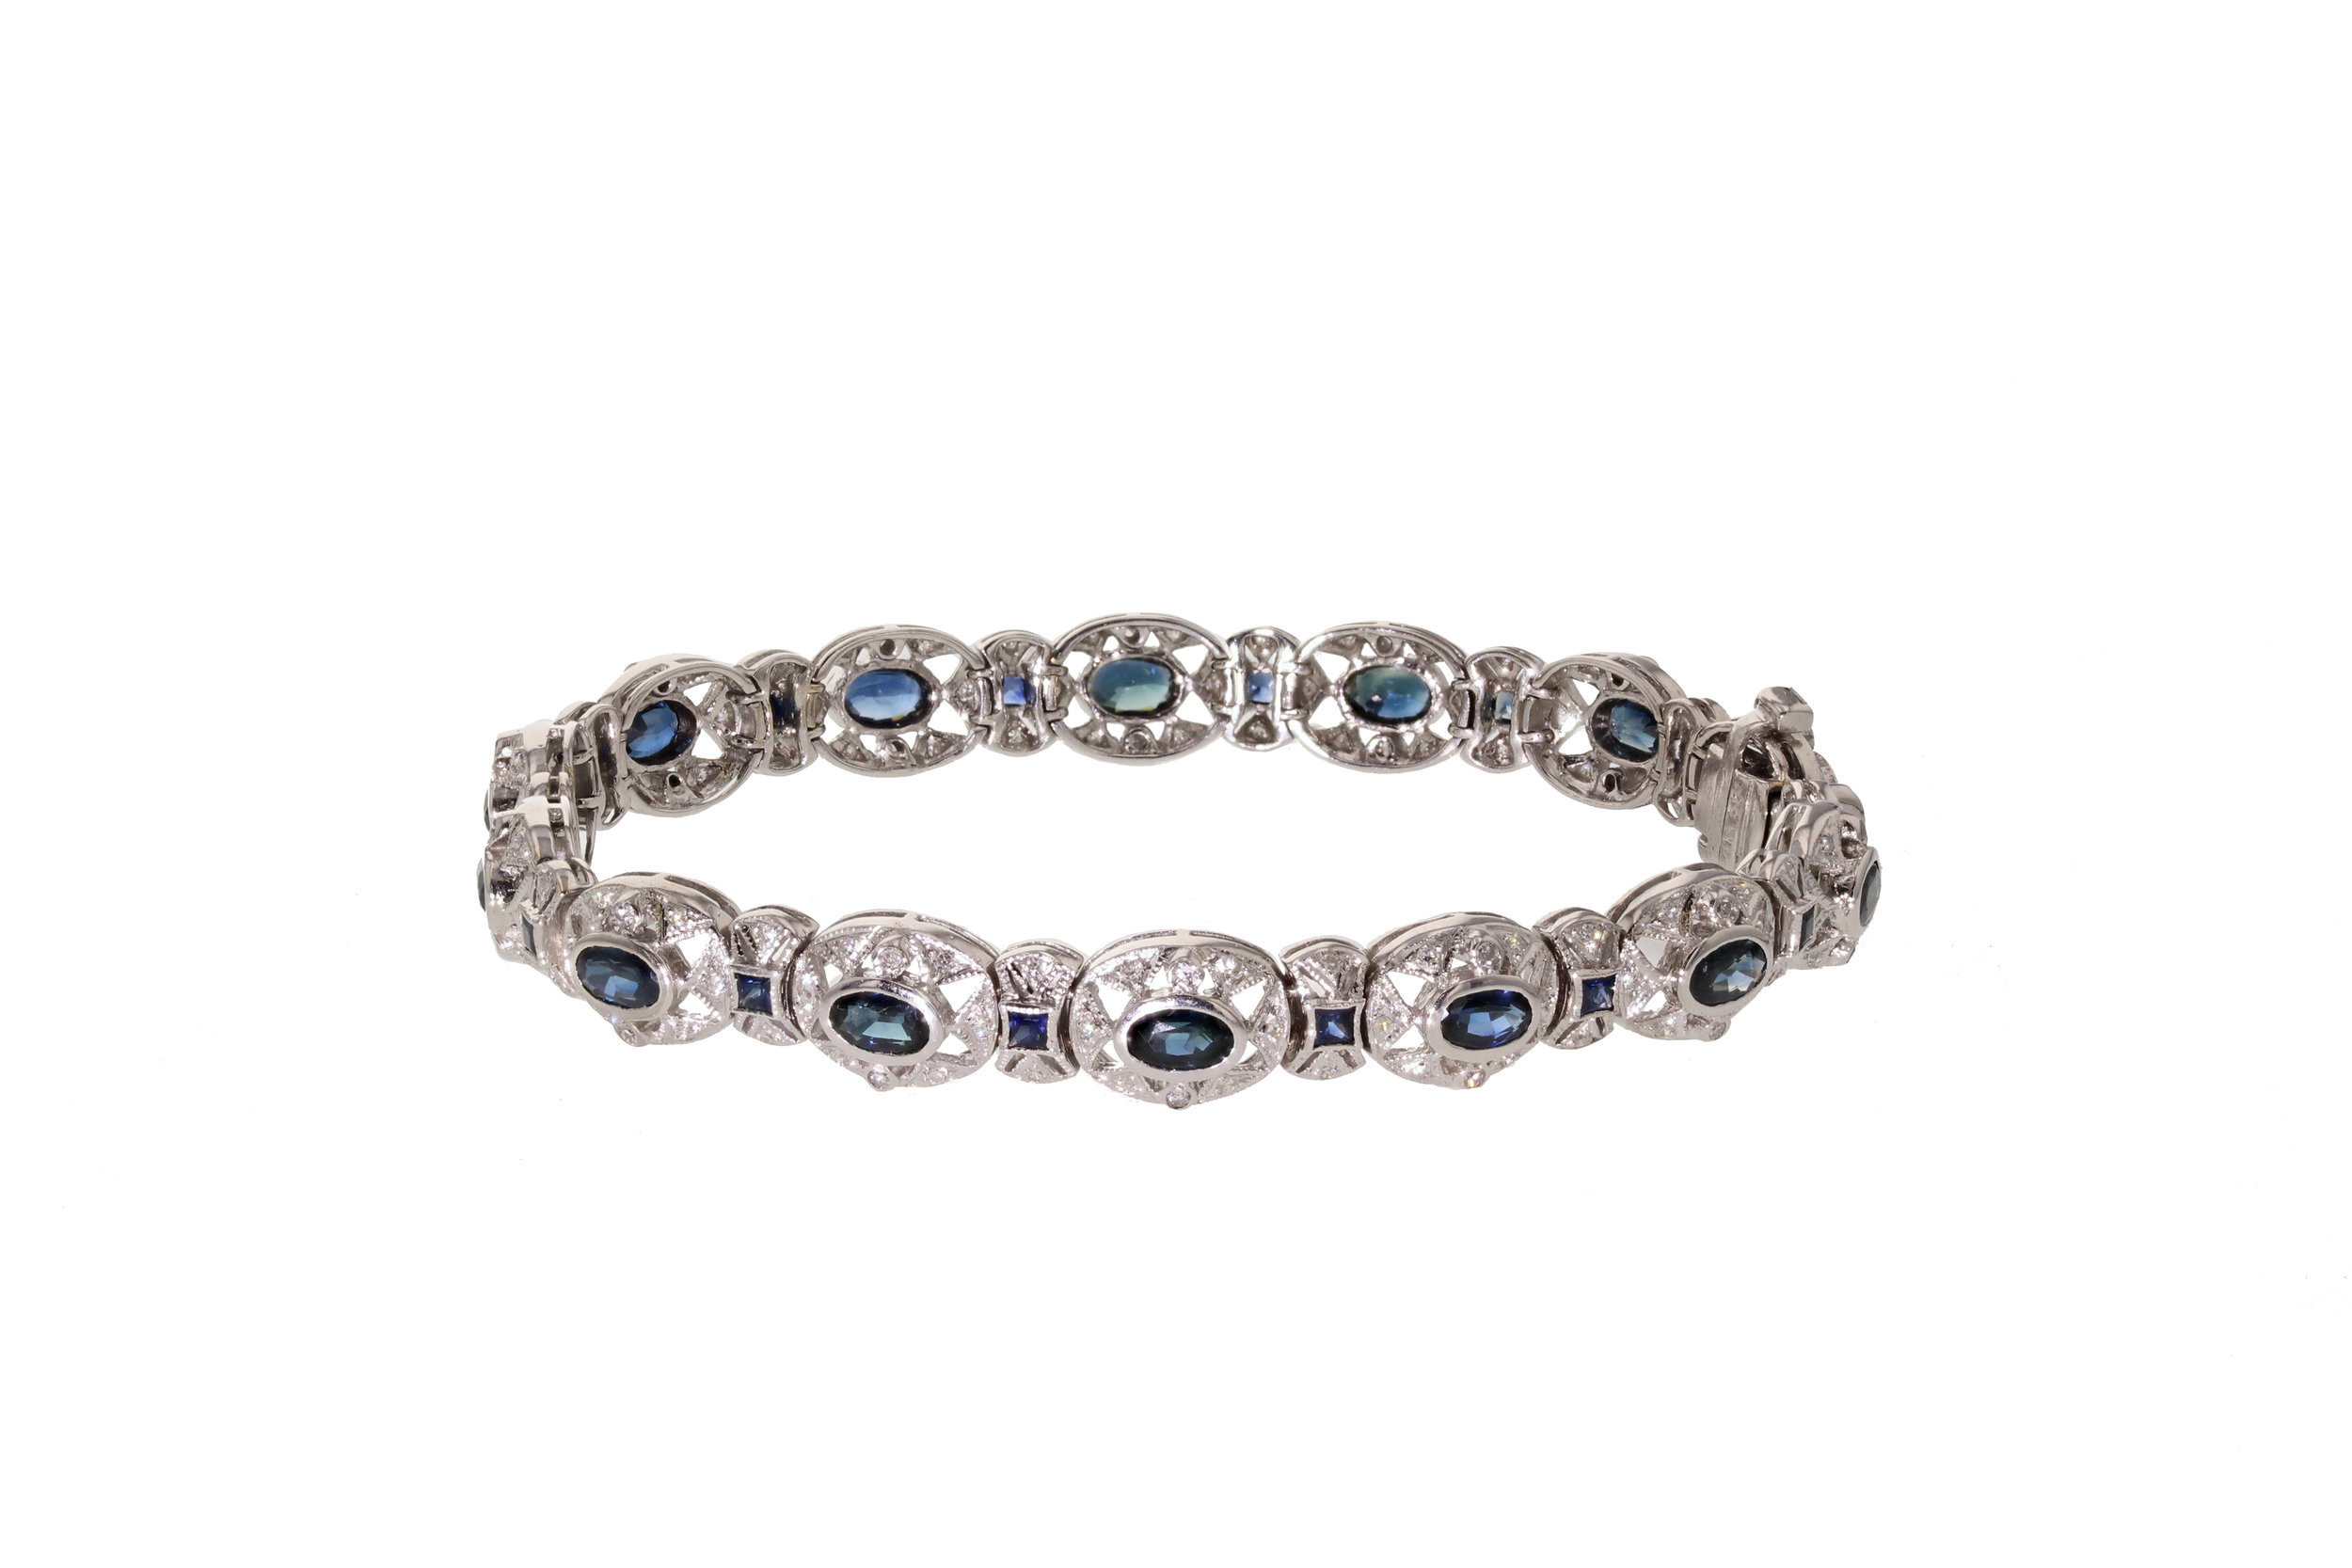 14kt White Gold Sapphire and Diamond Bracelet with 1.40 tcw diamonds and 5.18 tcw sapphires.&nbsp; $10,100